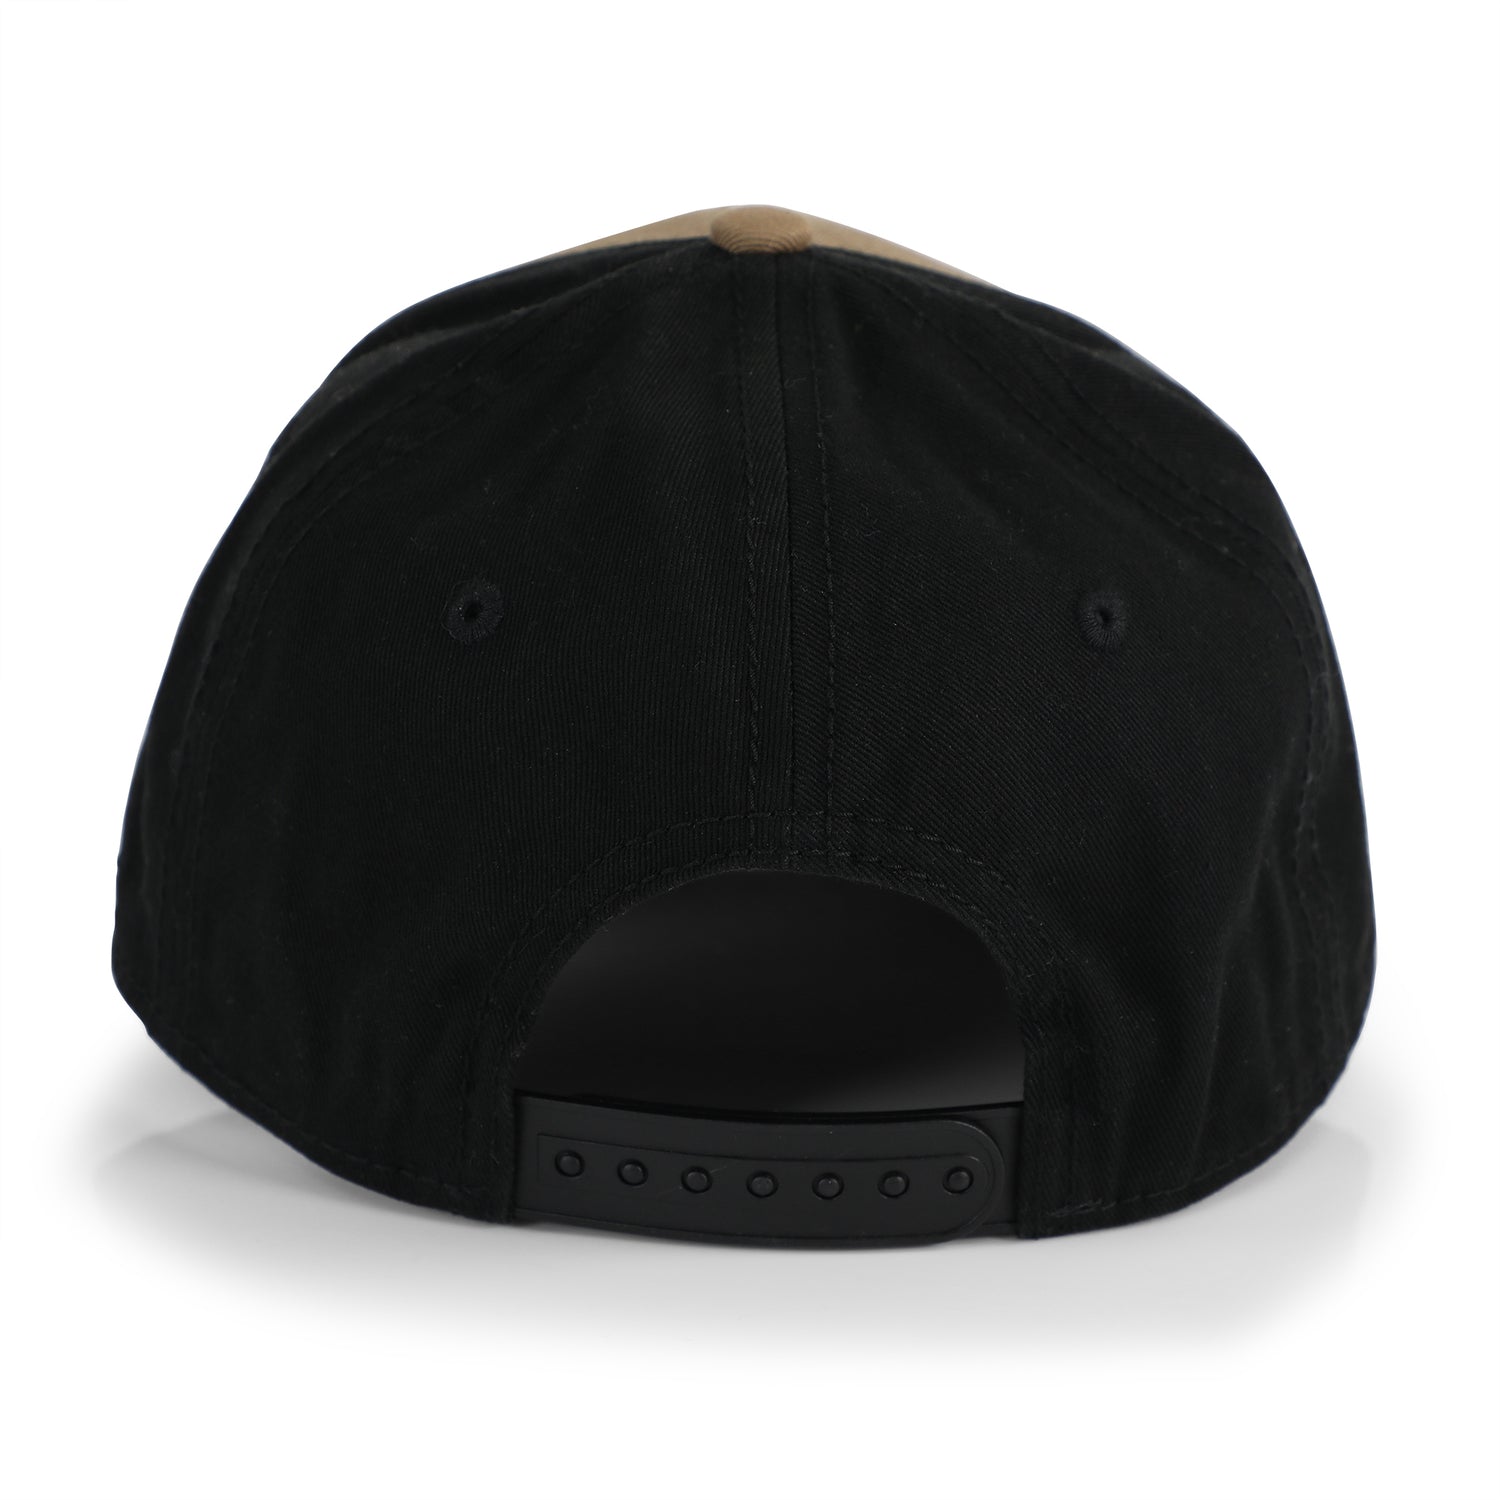 USA Black and Tan Hat | Grunt Style 